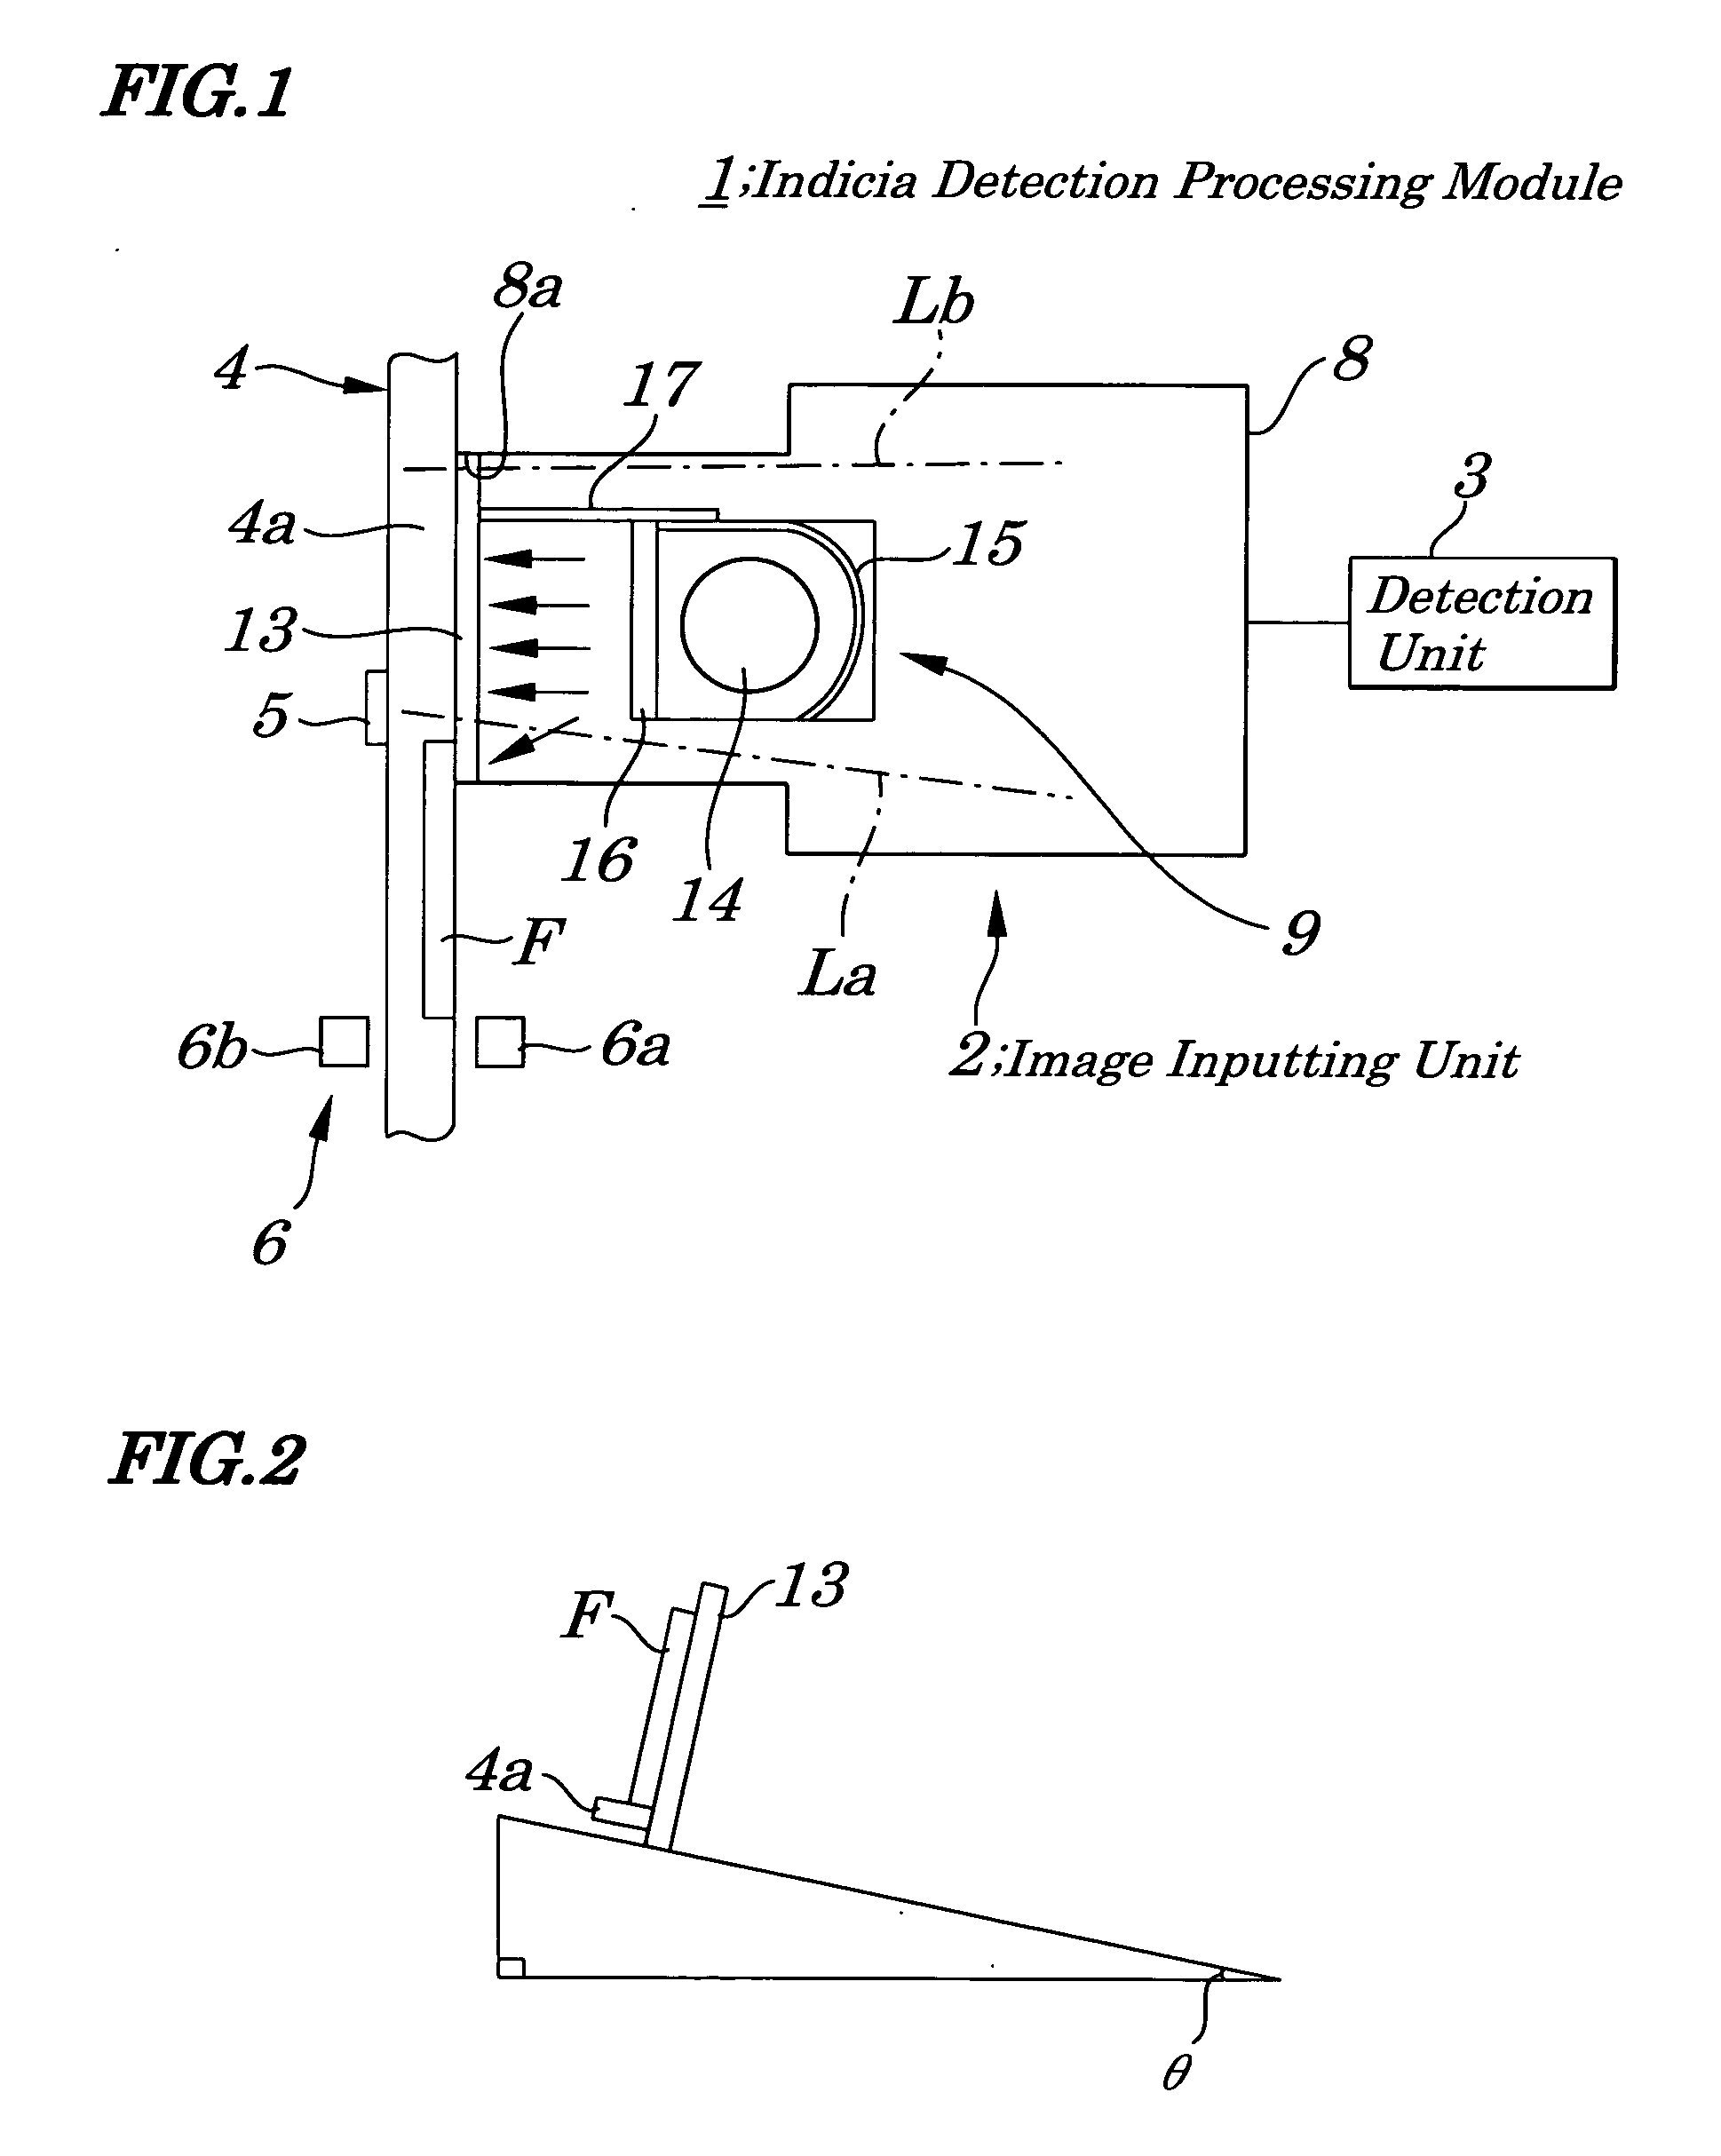 Image inputting device